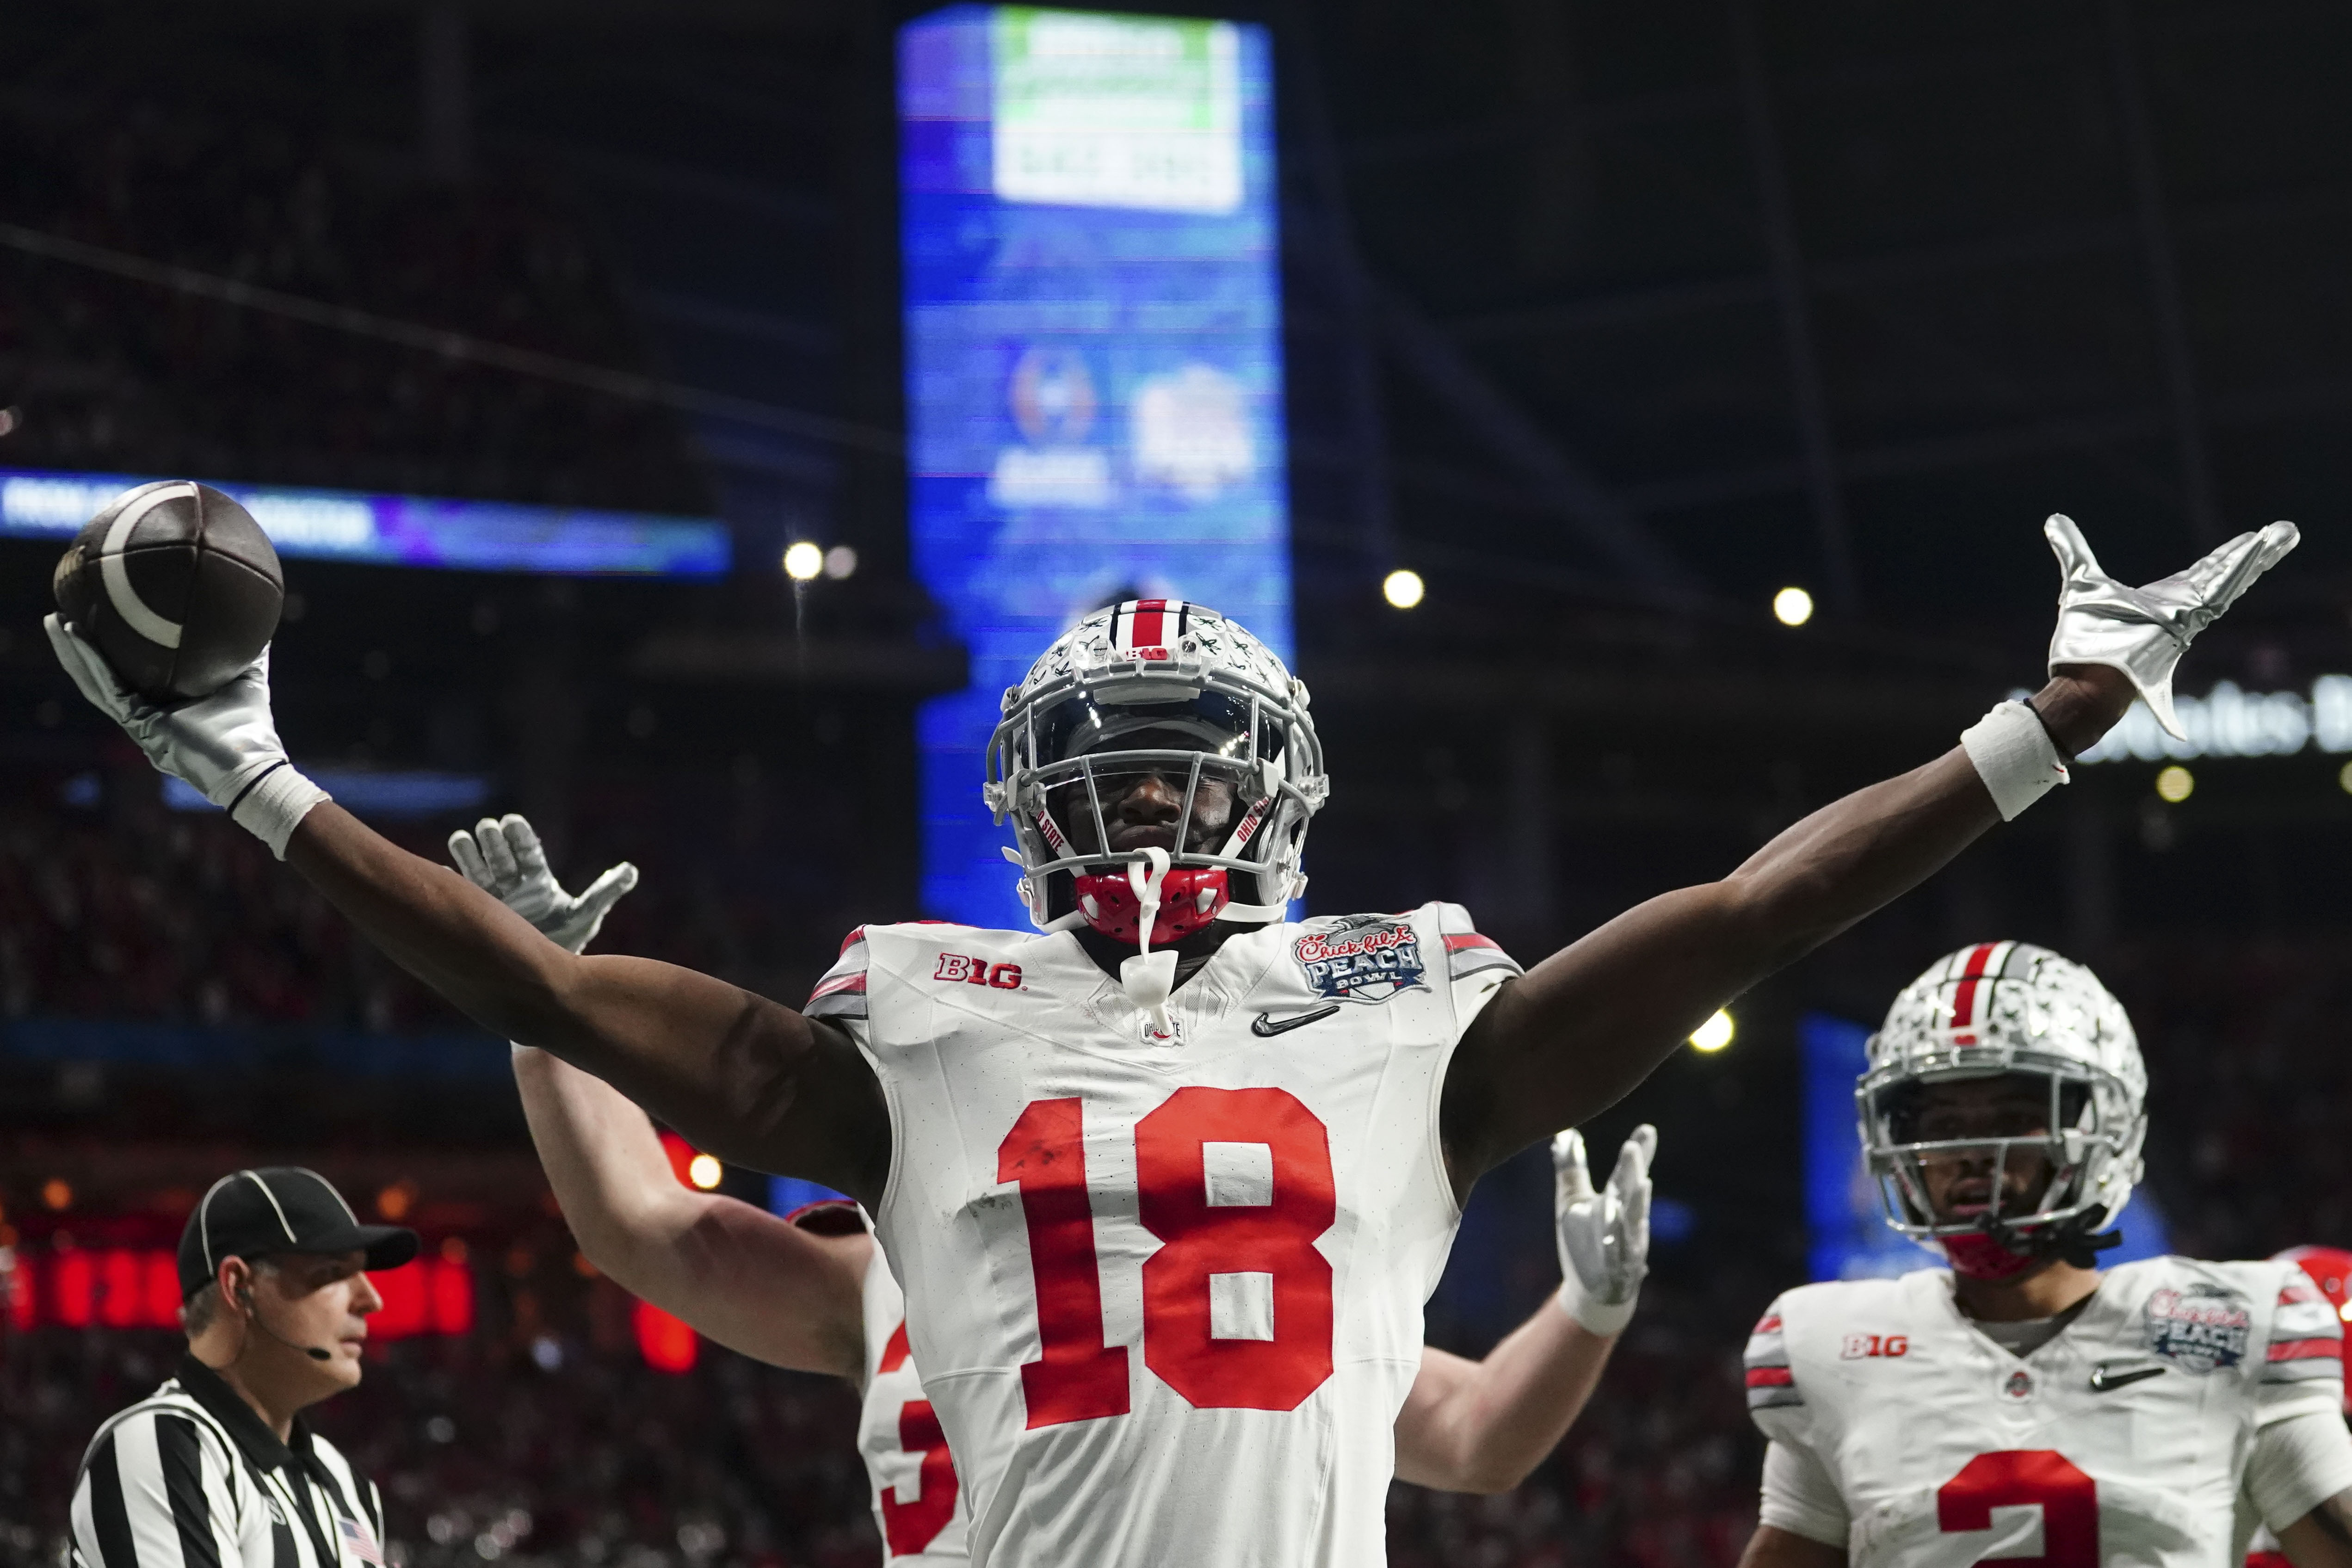 Ohio State football's Marvin Harrison Jr. snags most obvious endorsement  deal imaginable 